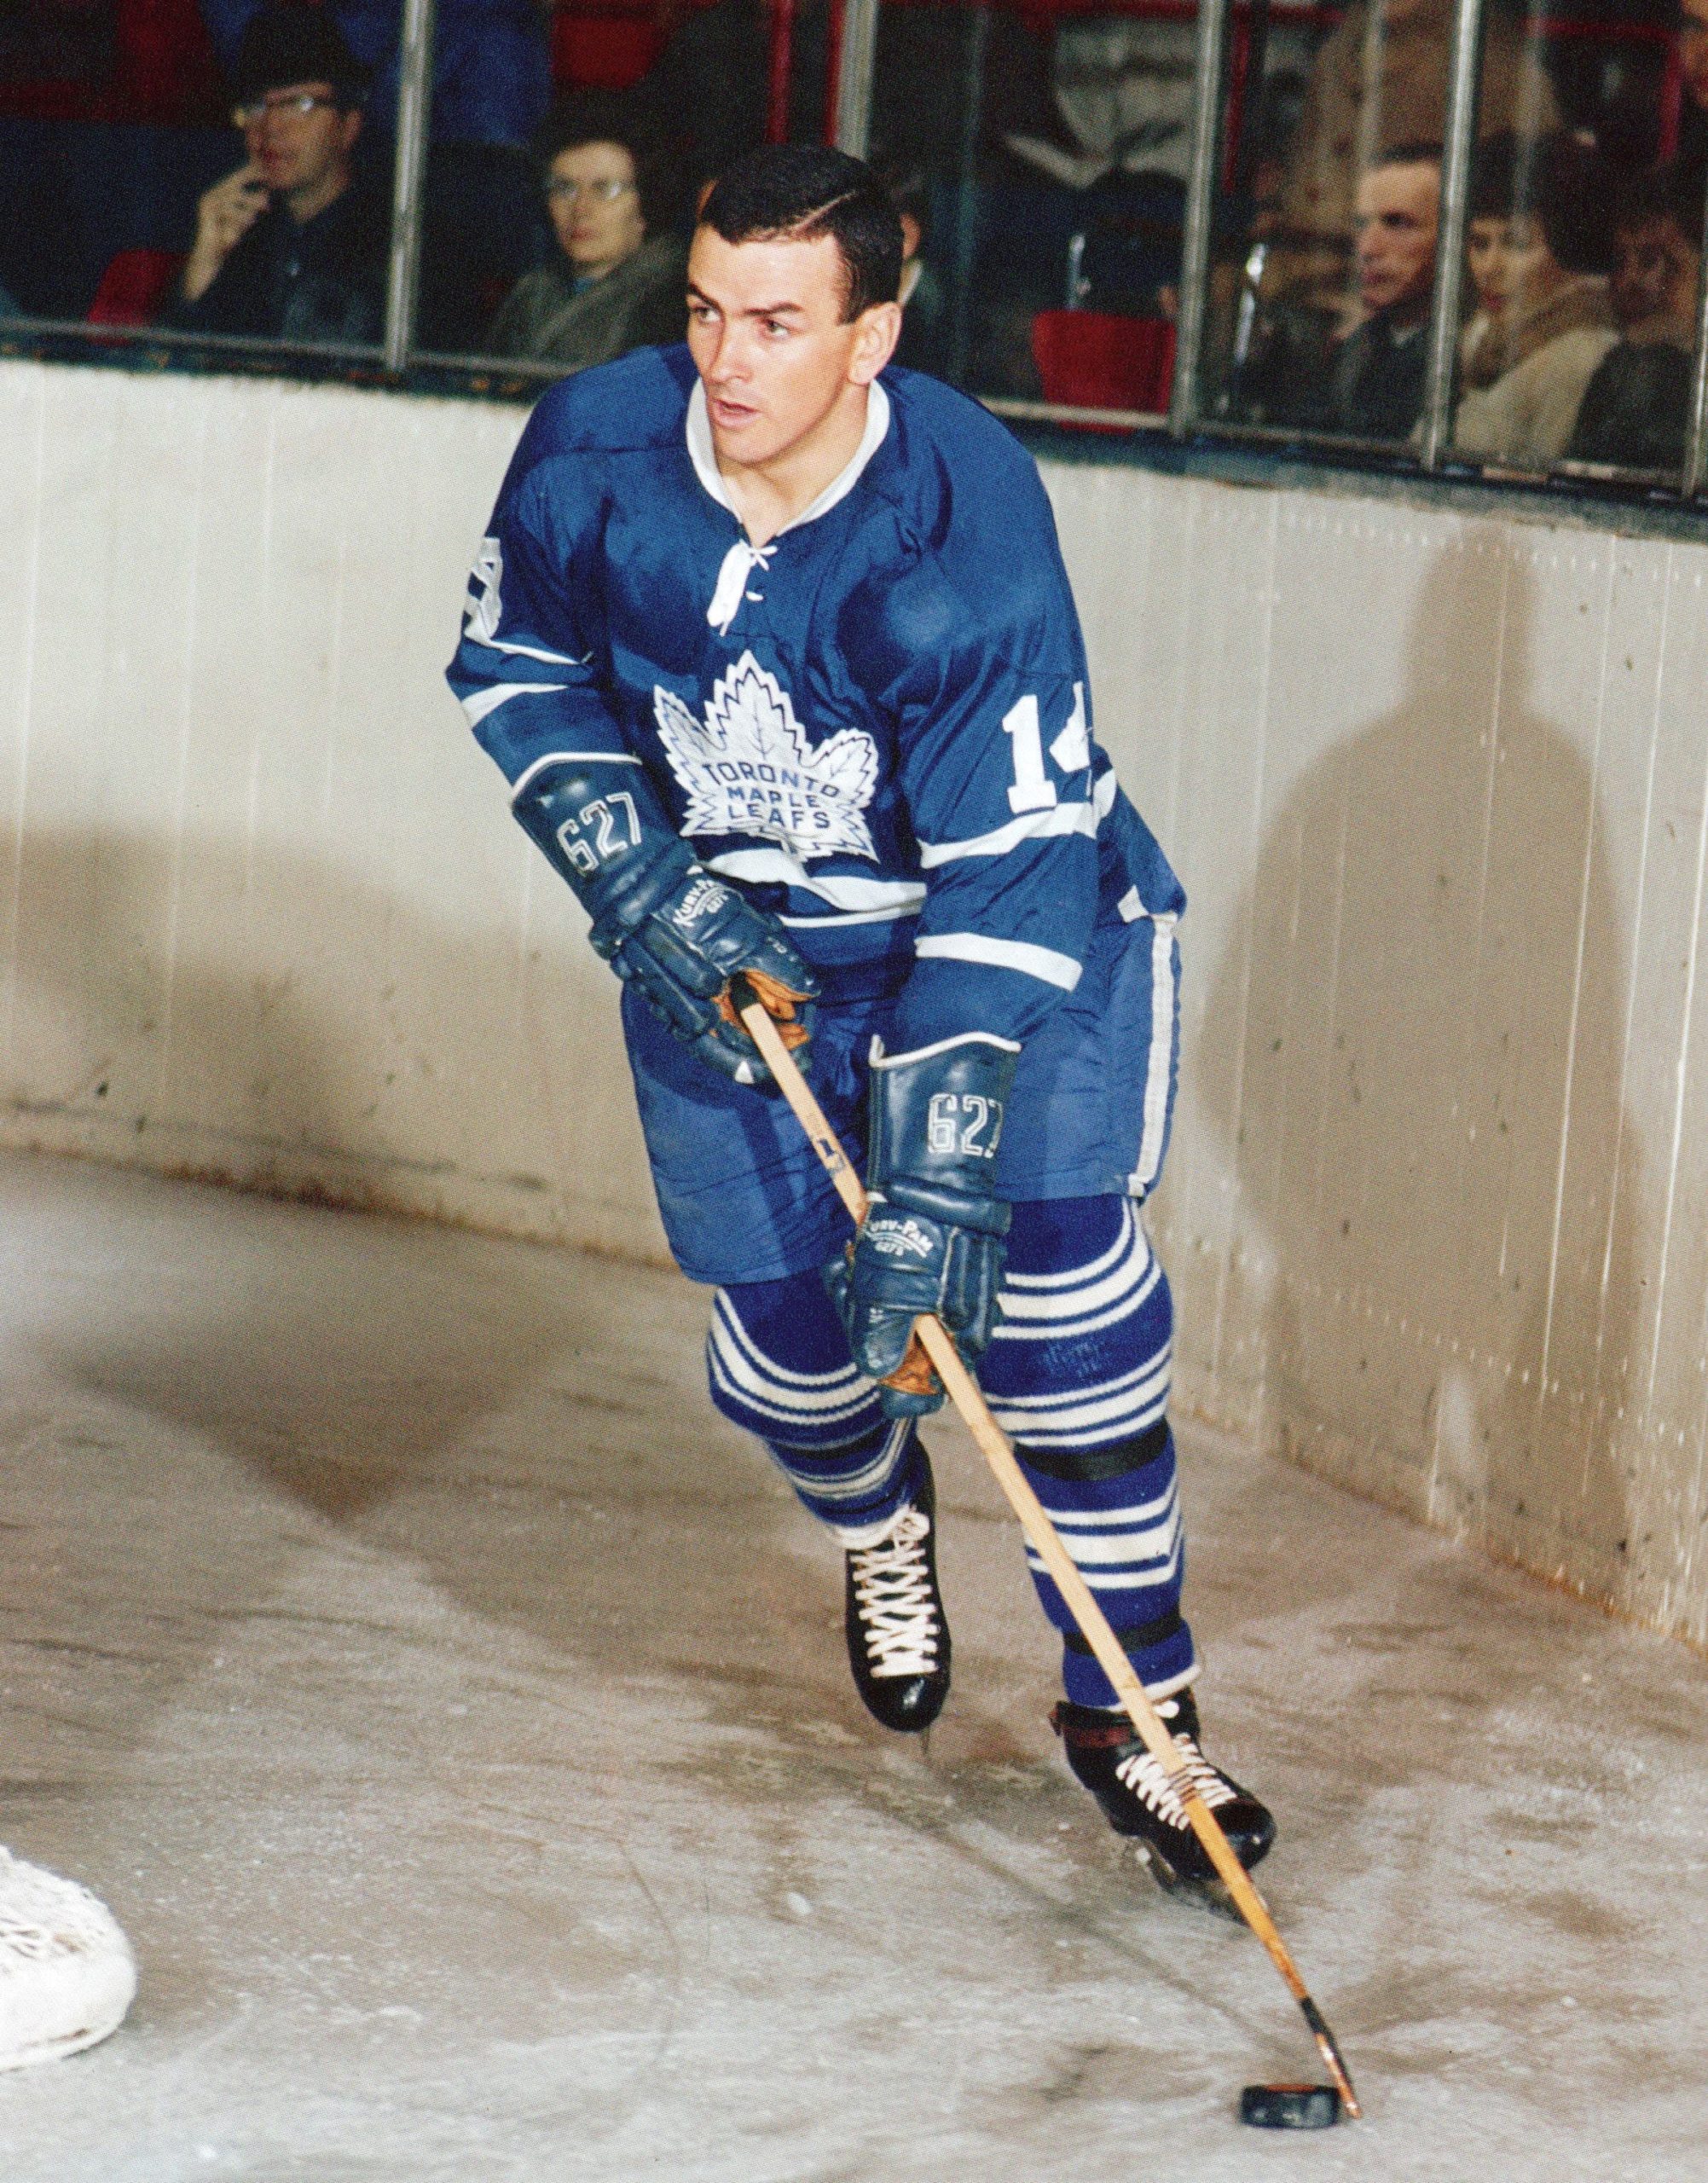 Greatest Maple Leafs: No. 1 Dave Keon